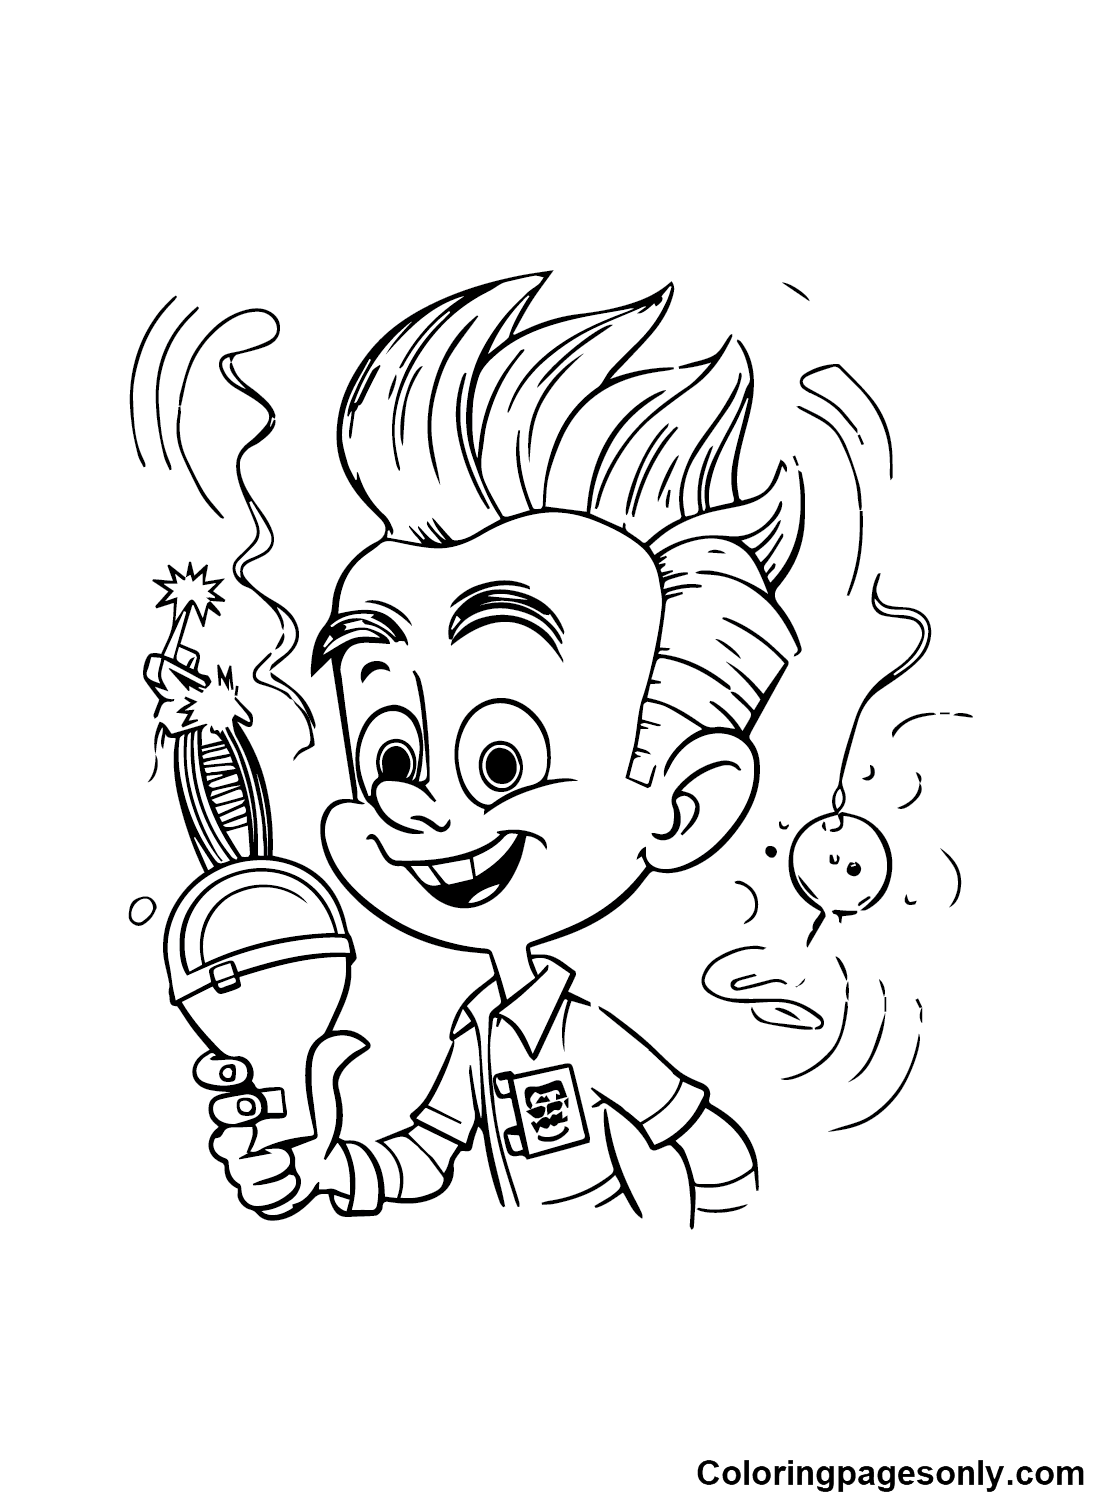 Jimmy Neutron Coloring Pages Printable for Free Download